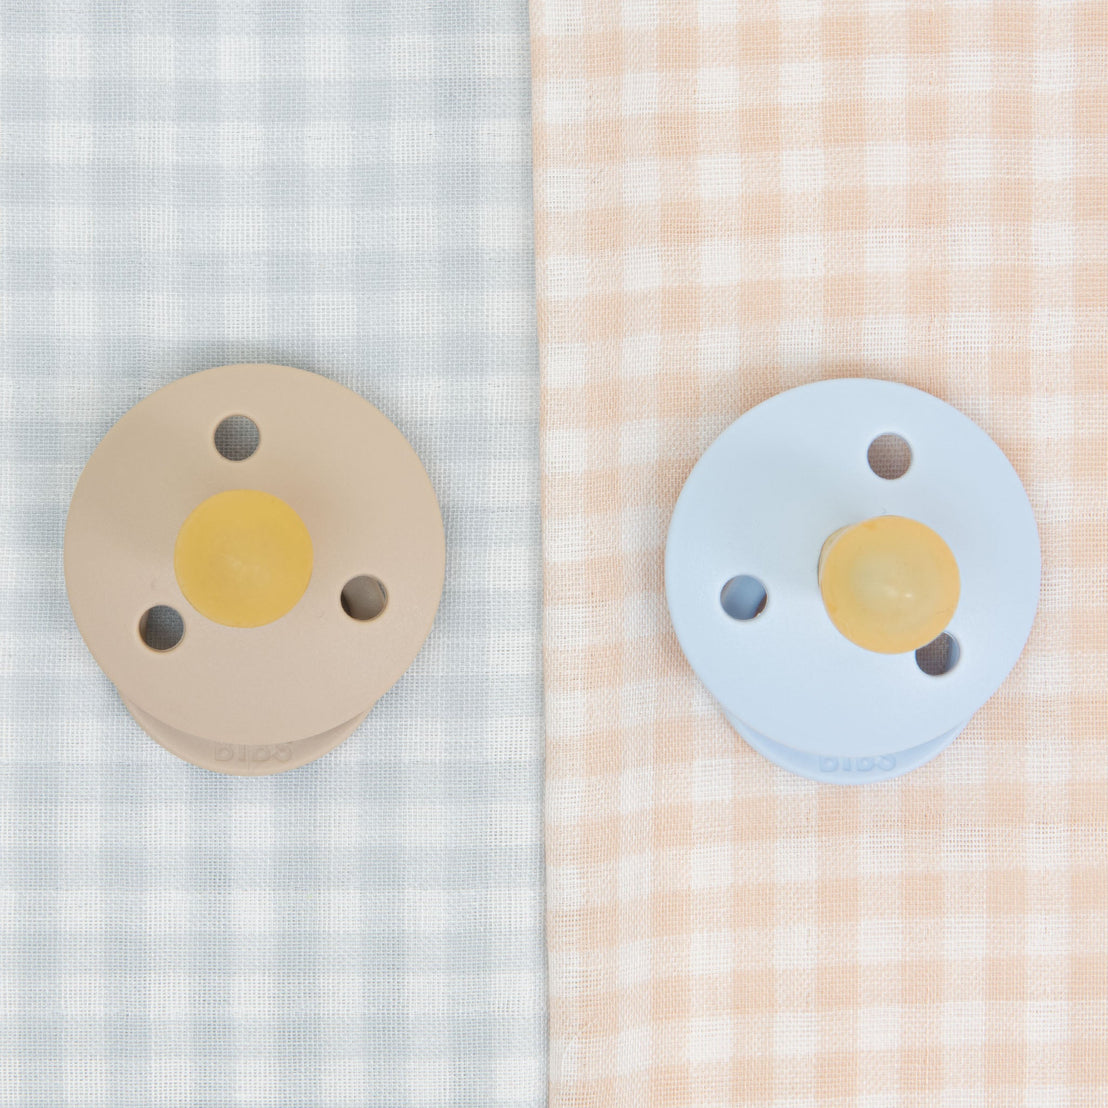 Two Isla pacifiers, one beige and one blue, placed on contrasting vintage gingham fabric backgrounds in light blue and peach colors.